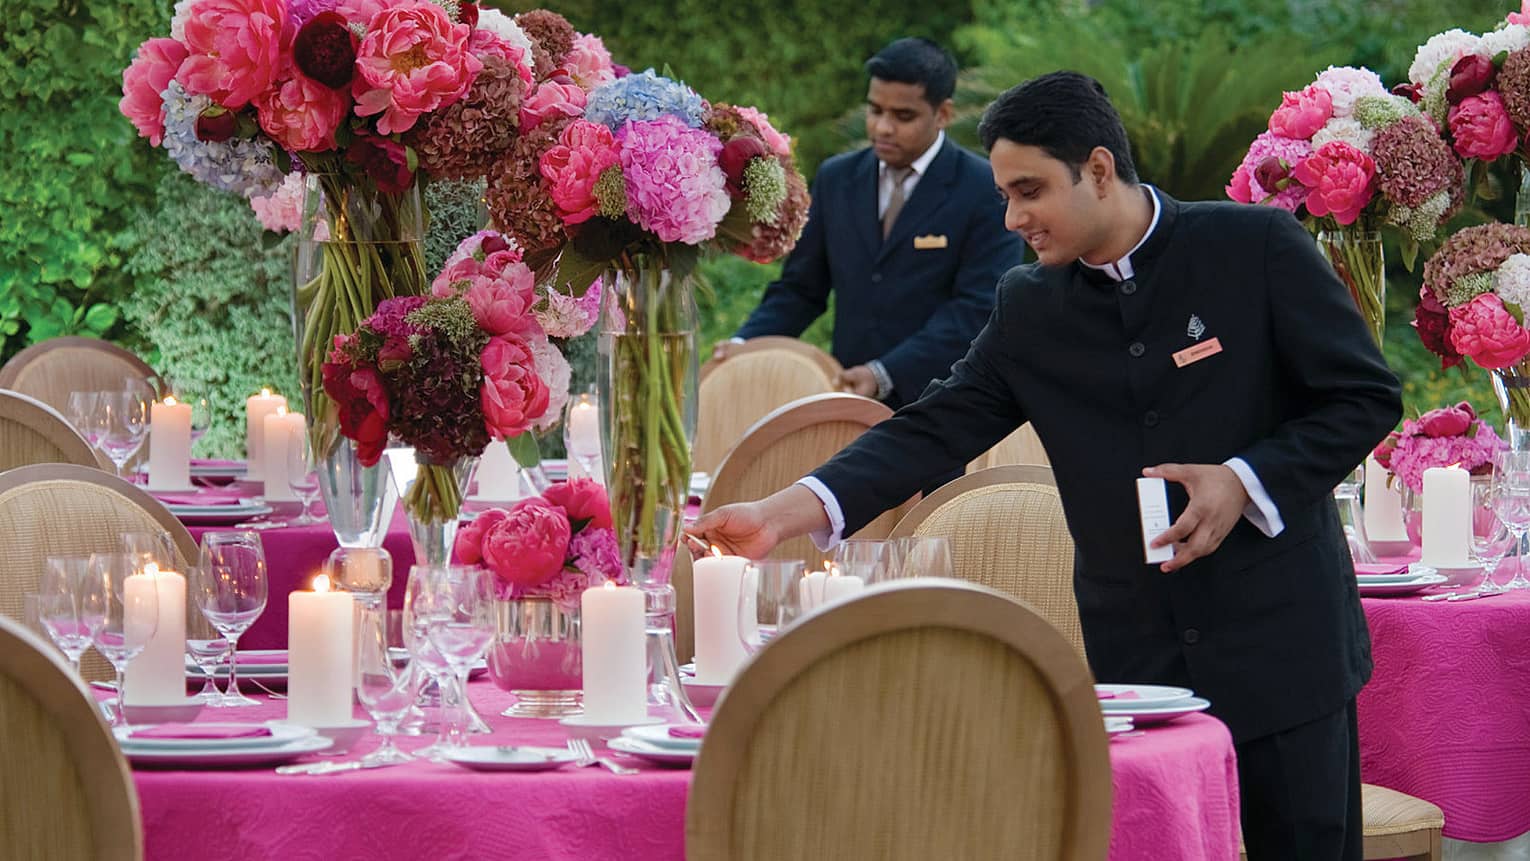 Two male staff set table with pink tablecloth, large vases of flowers and candles